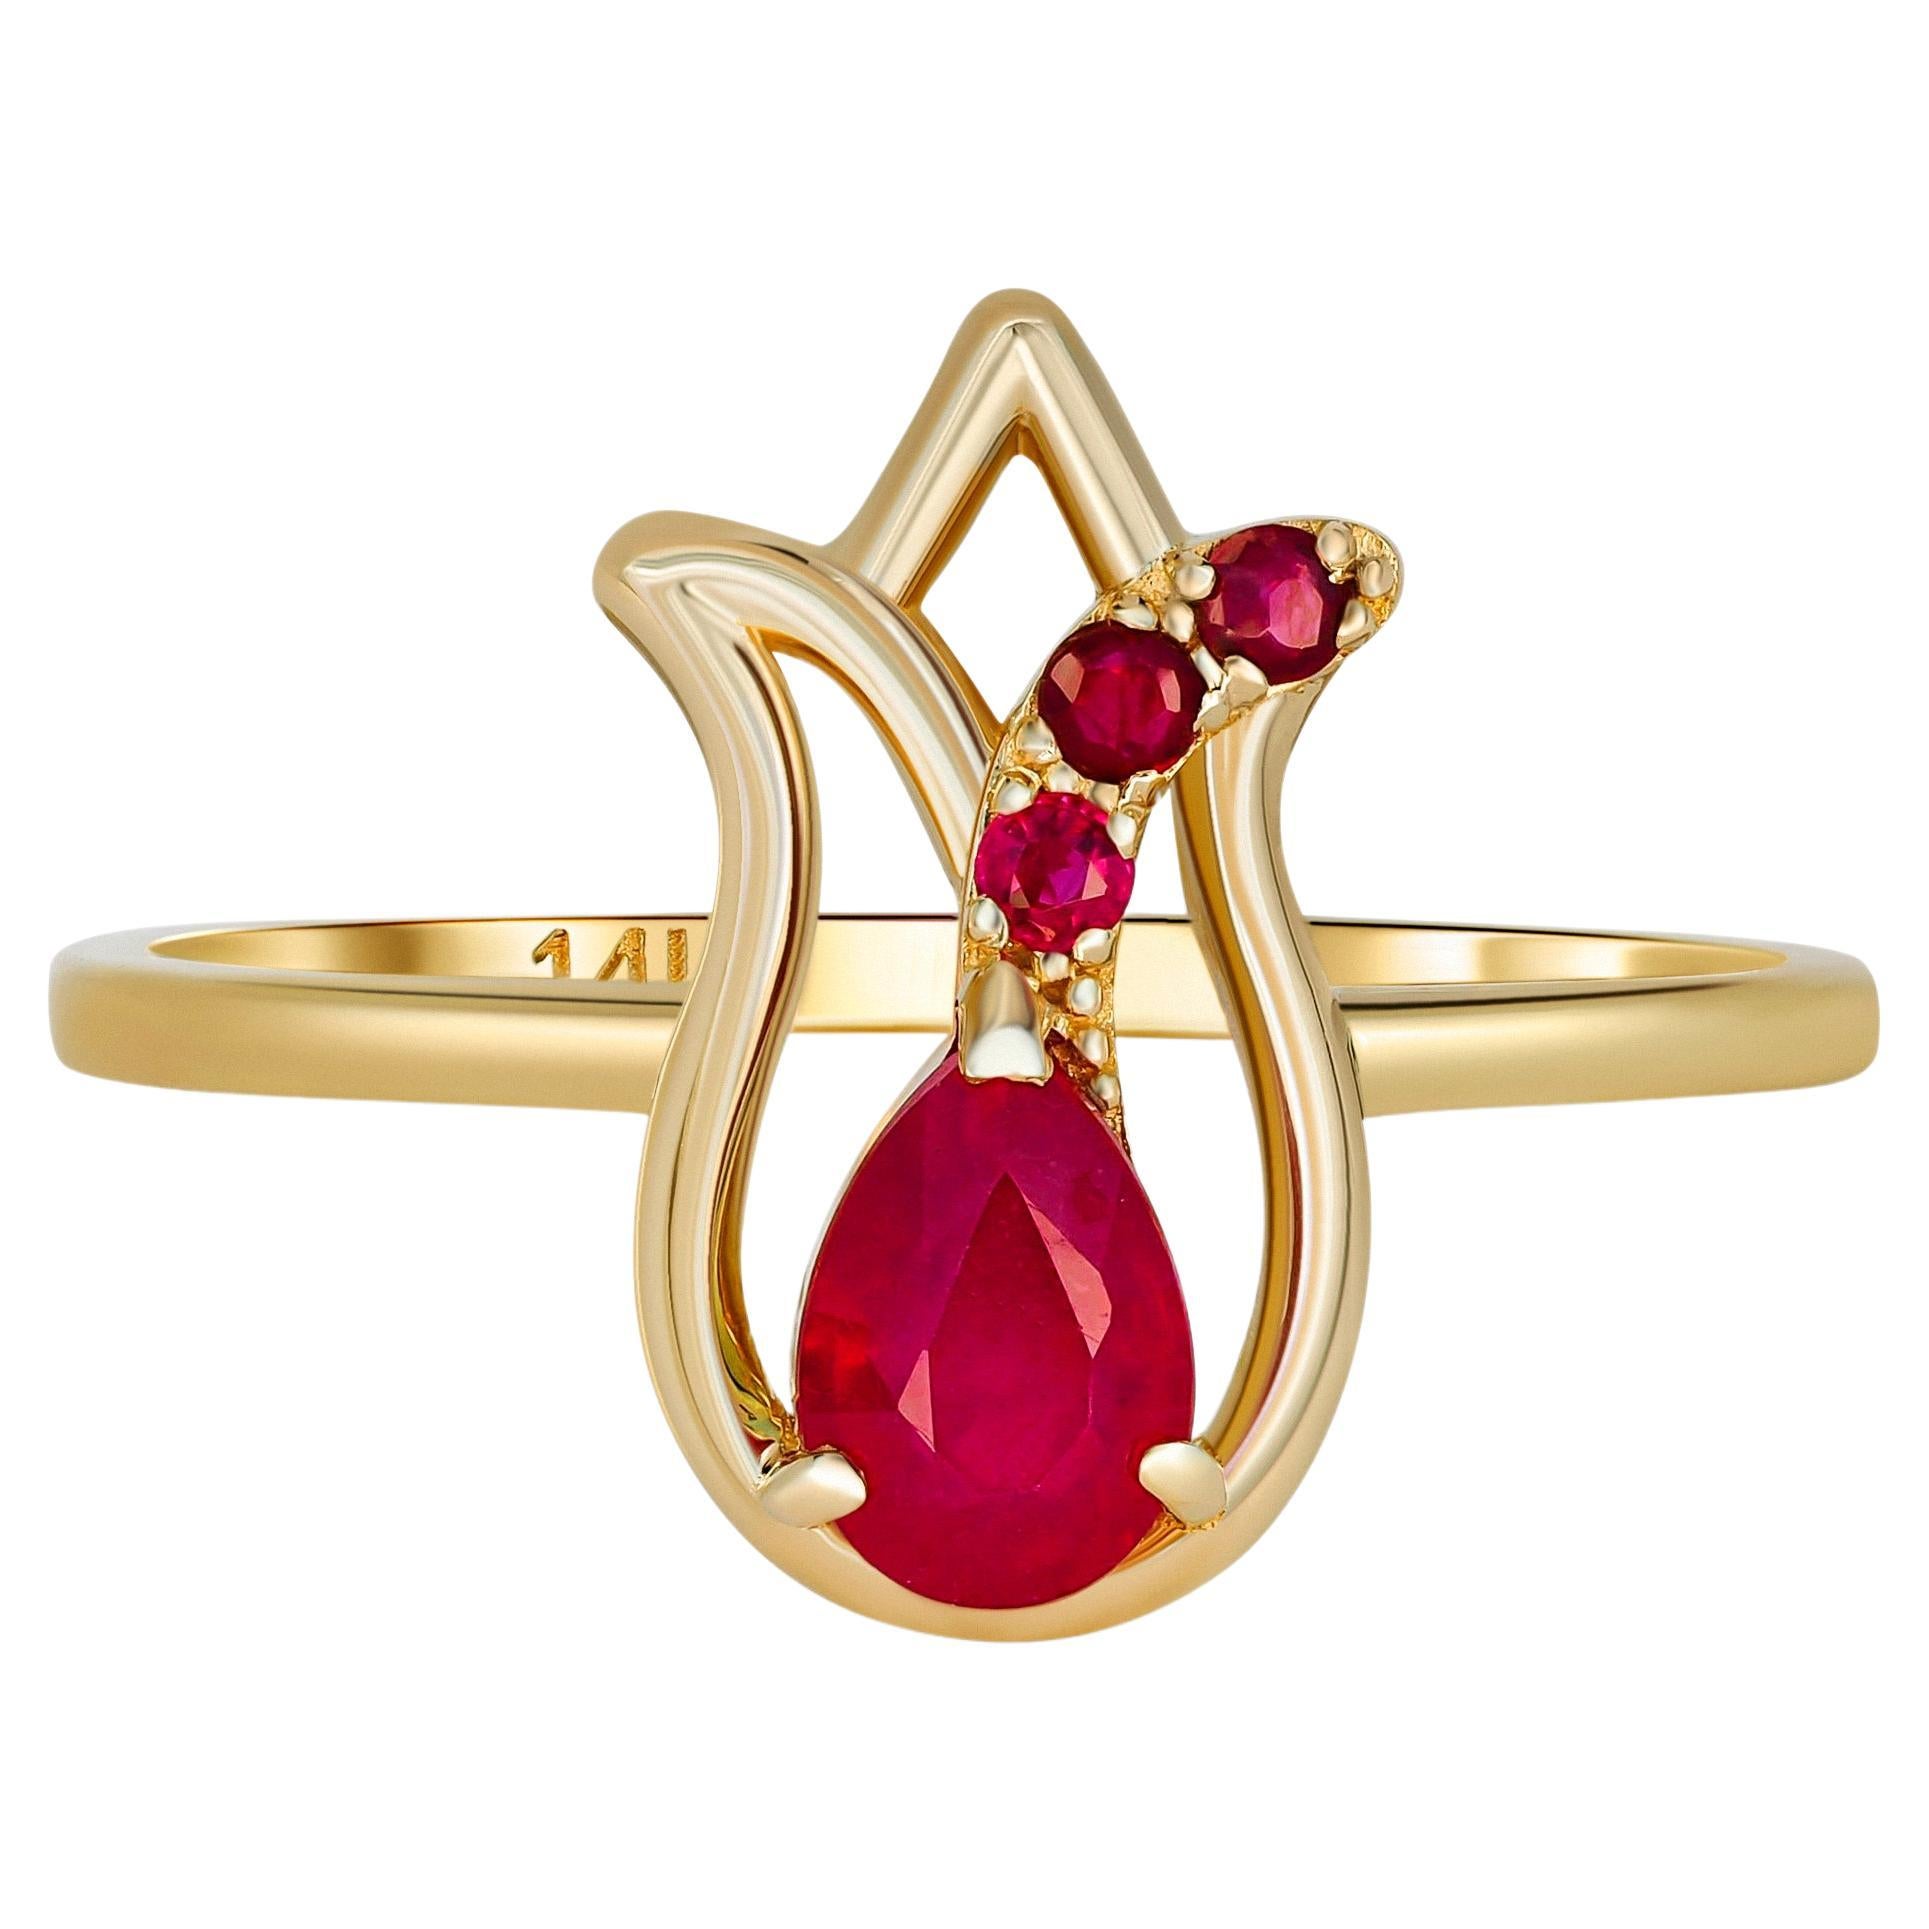 For Sale:  14 Karat Gold Ring with Ruby and Side Rubies. Gold Tulip Flower Ring !